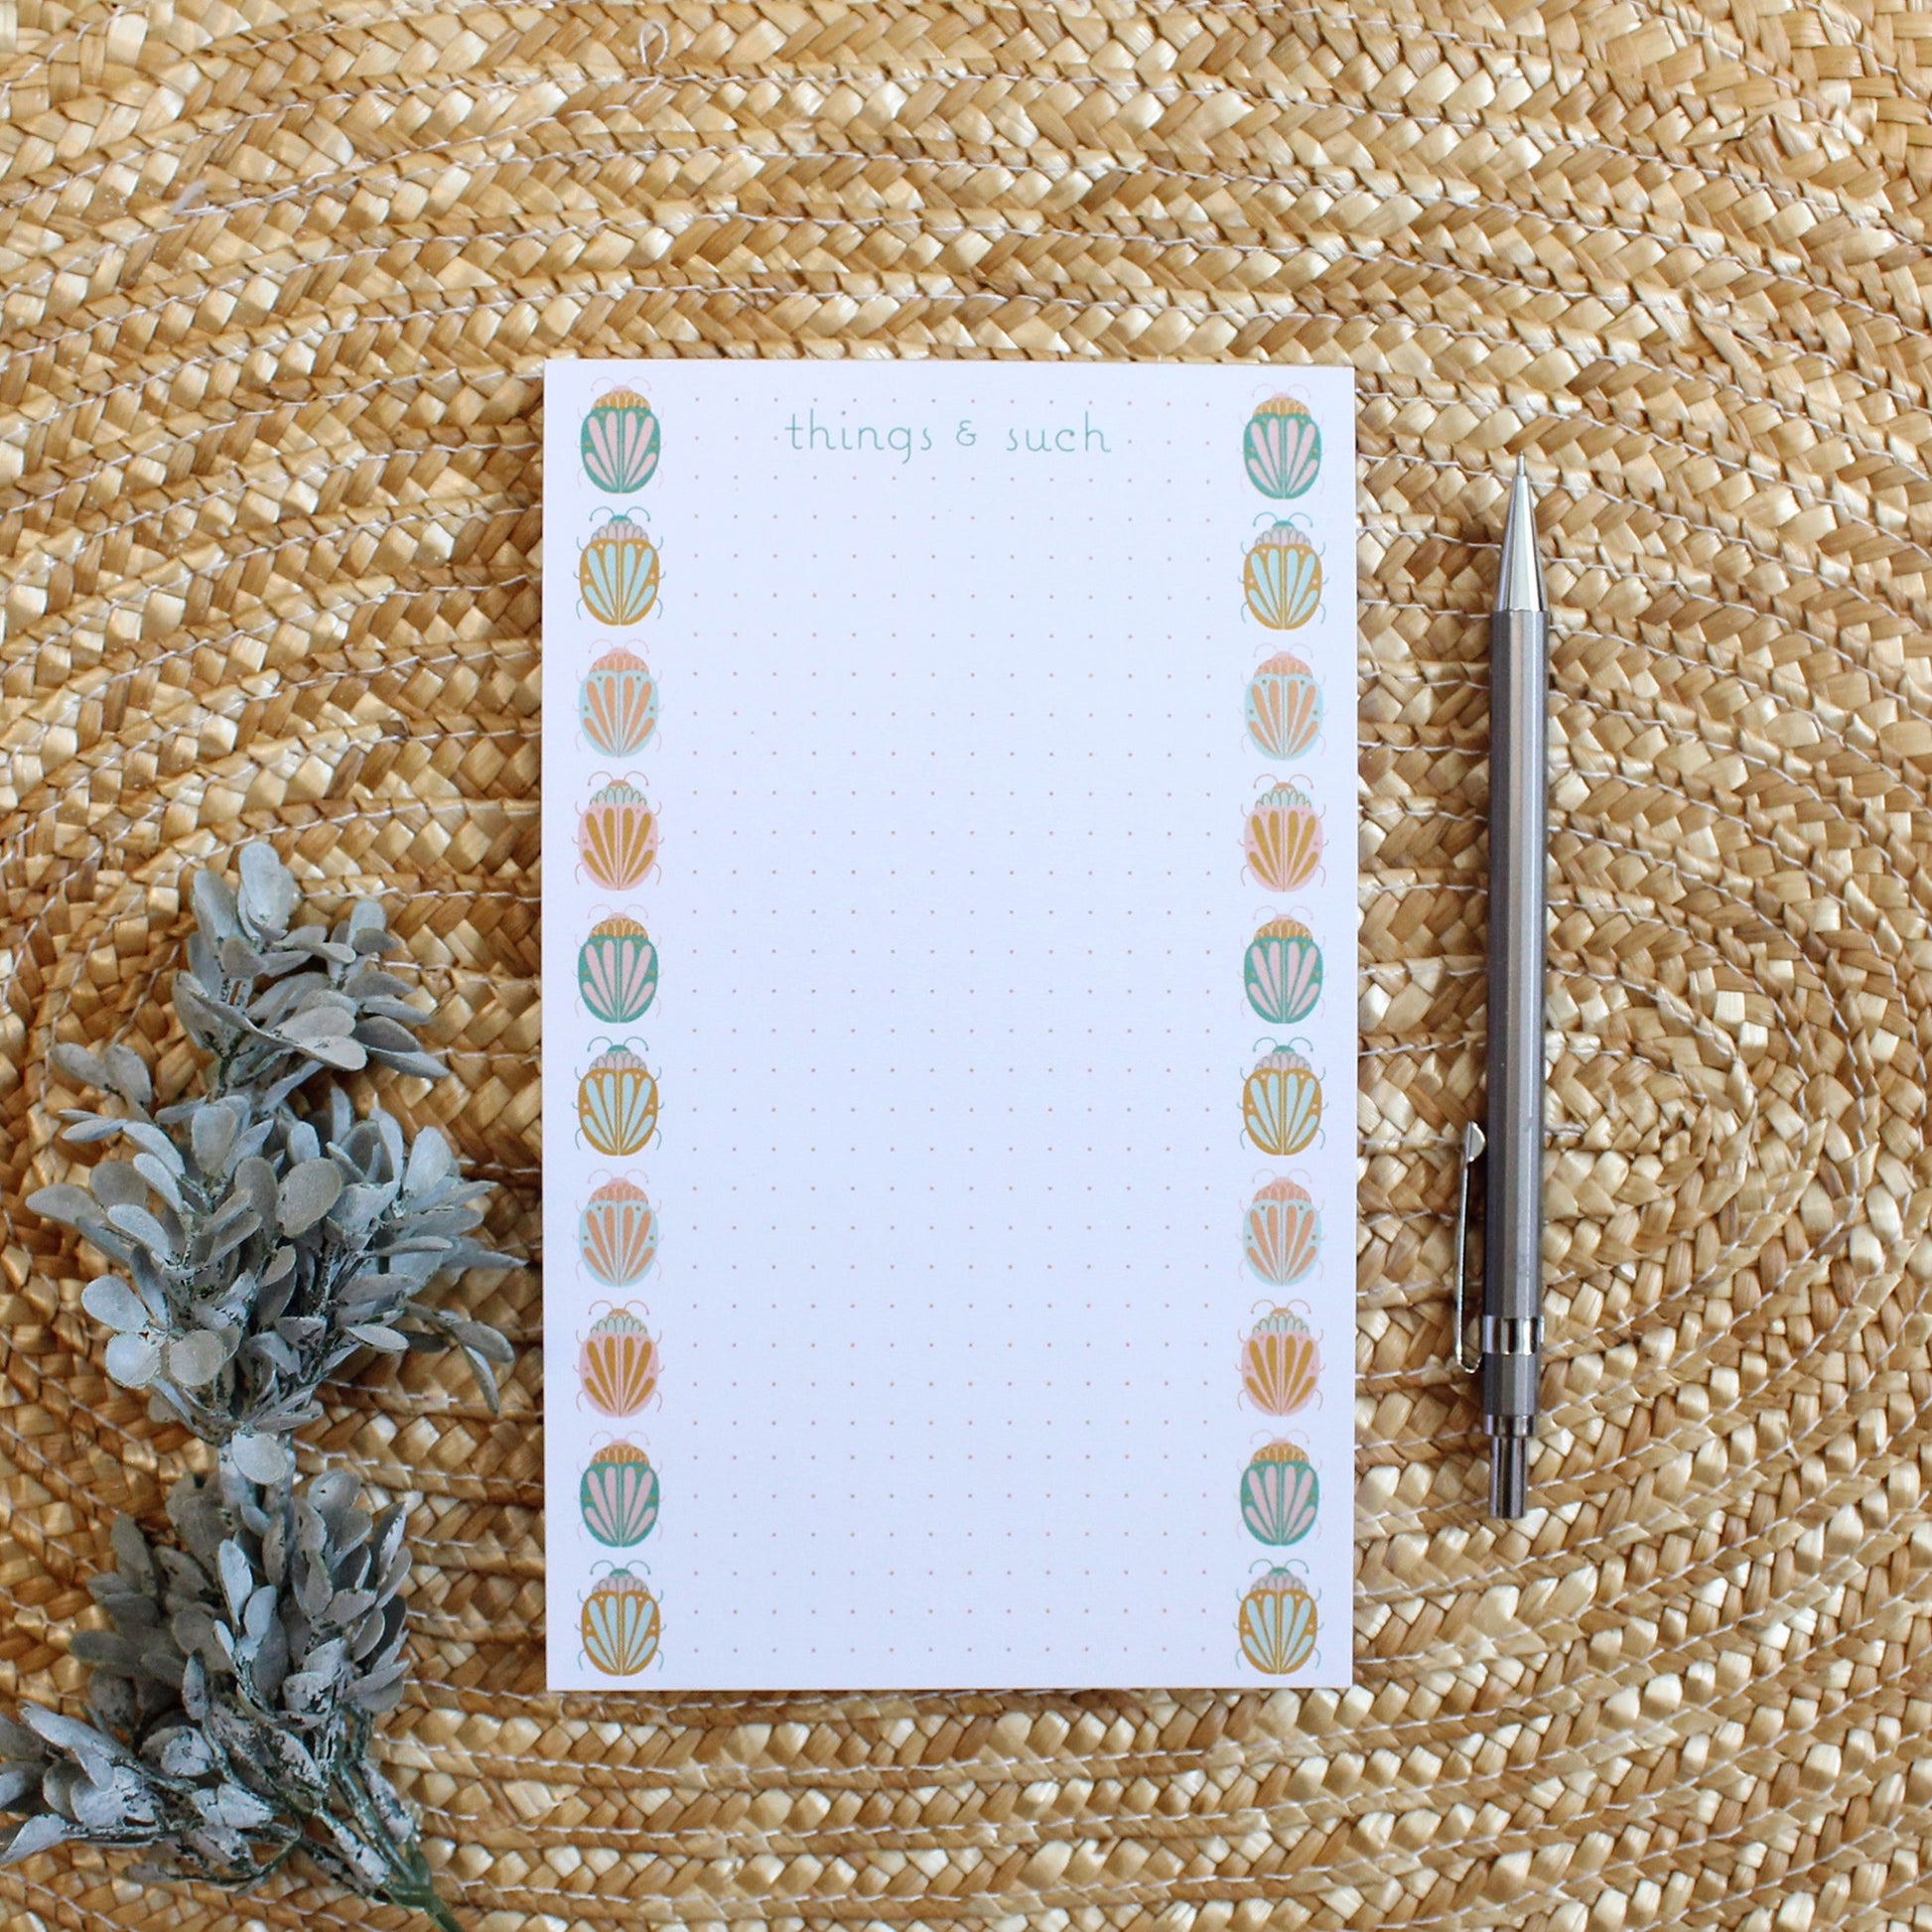 dotted notepad with colorful beetle illustrations going up either side of the paper.